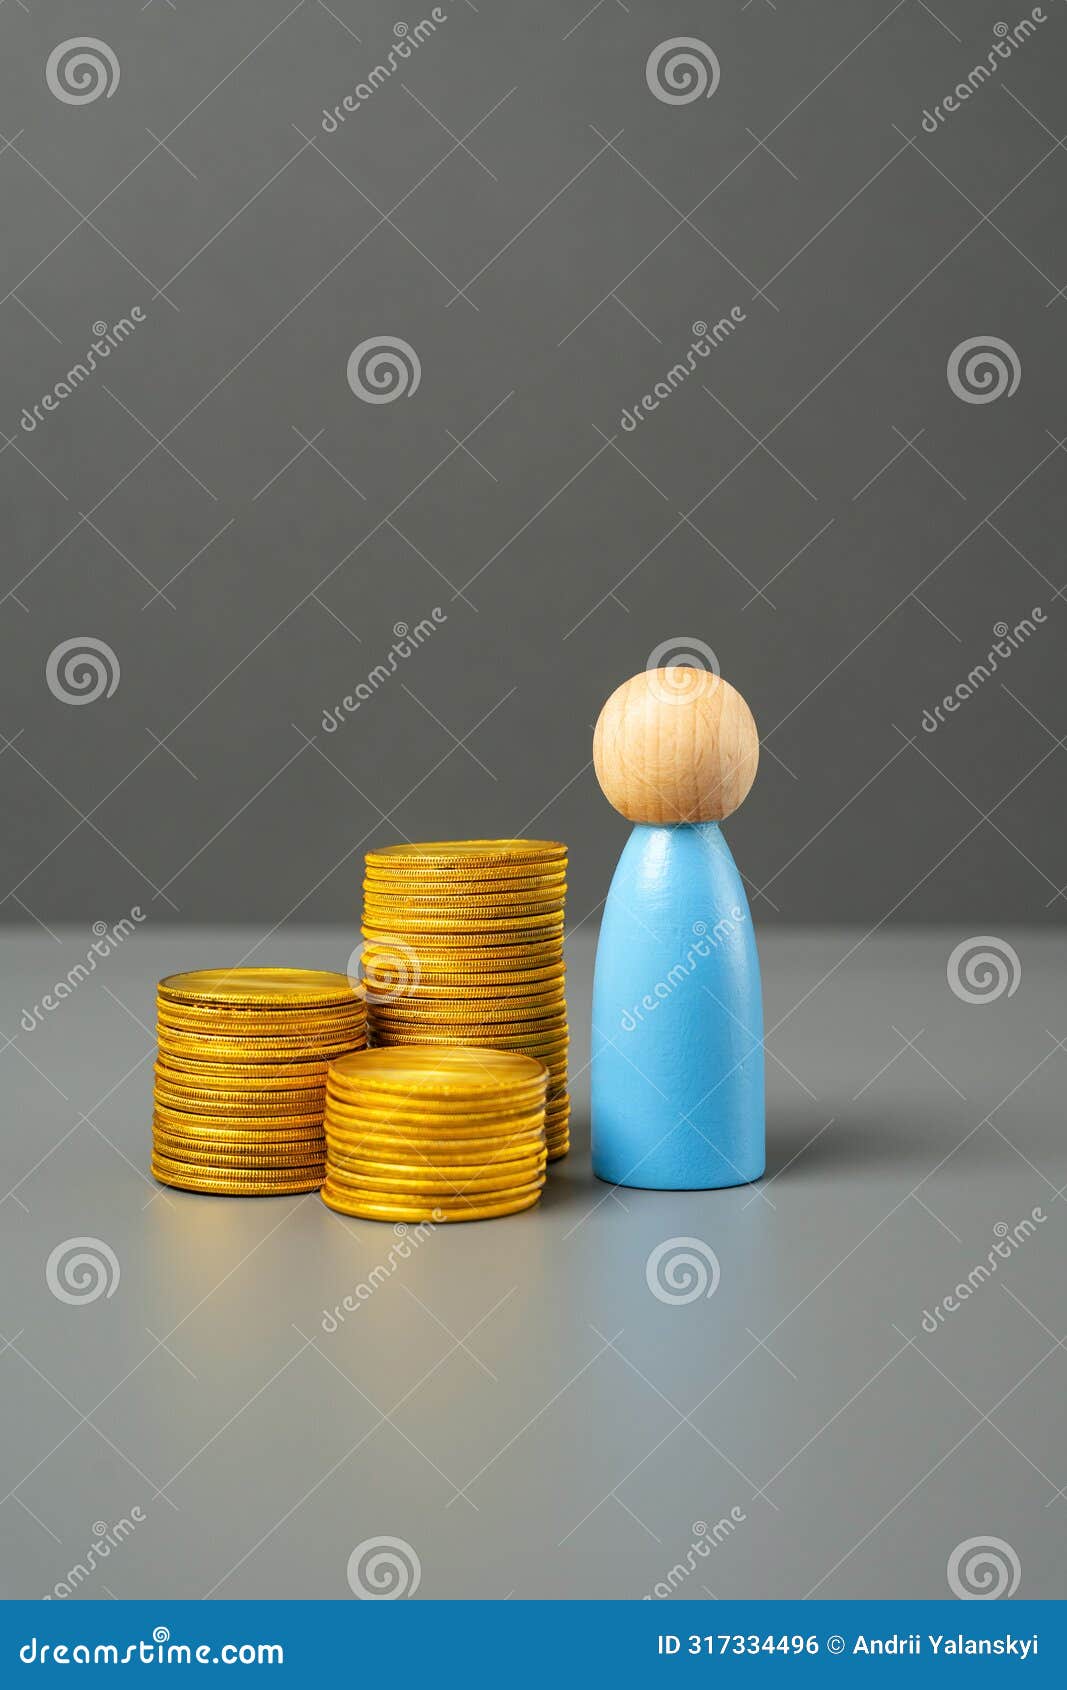 a figurine of a man and a stack of coins. savings and capital.